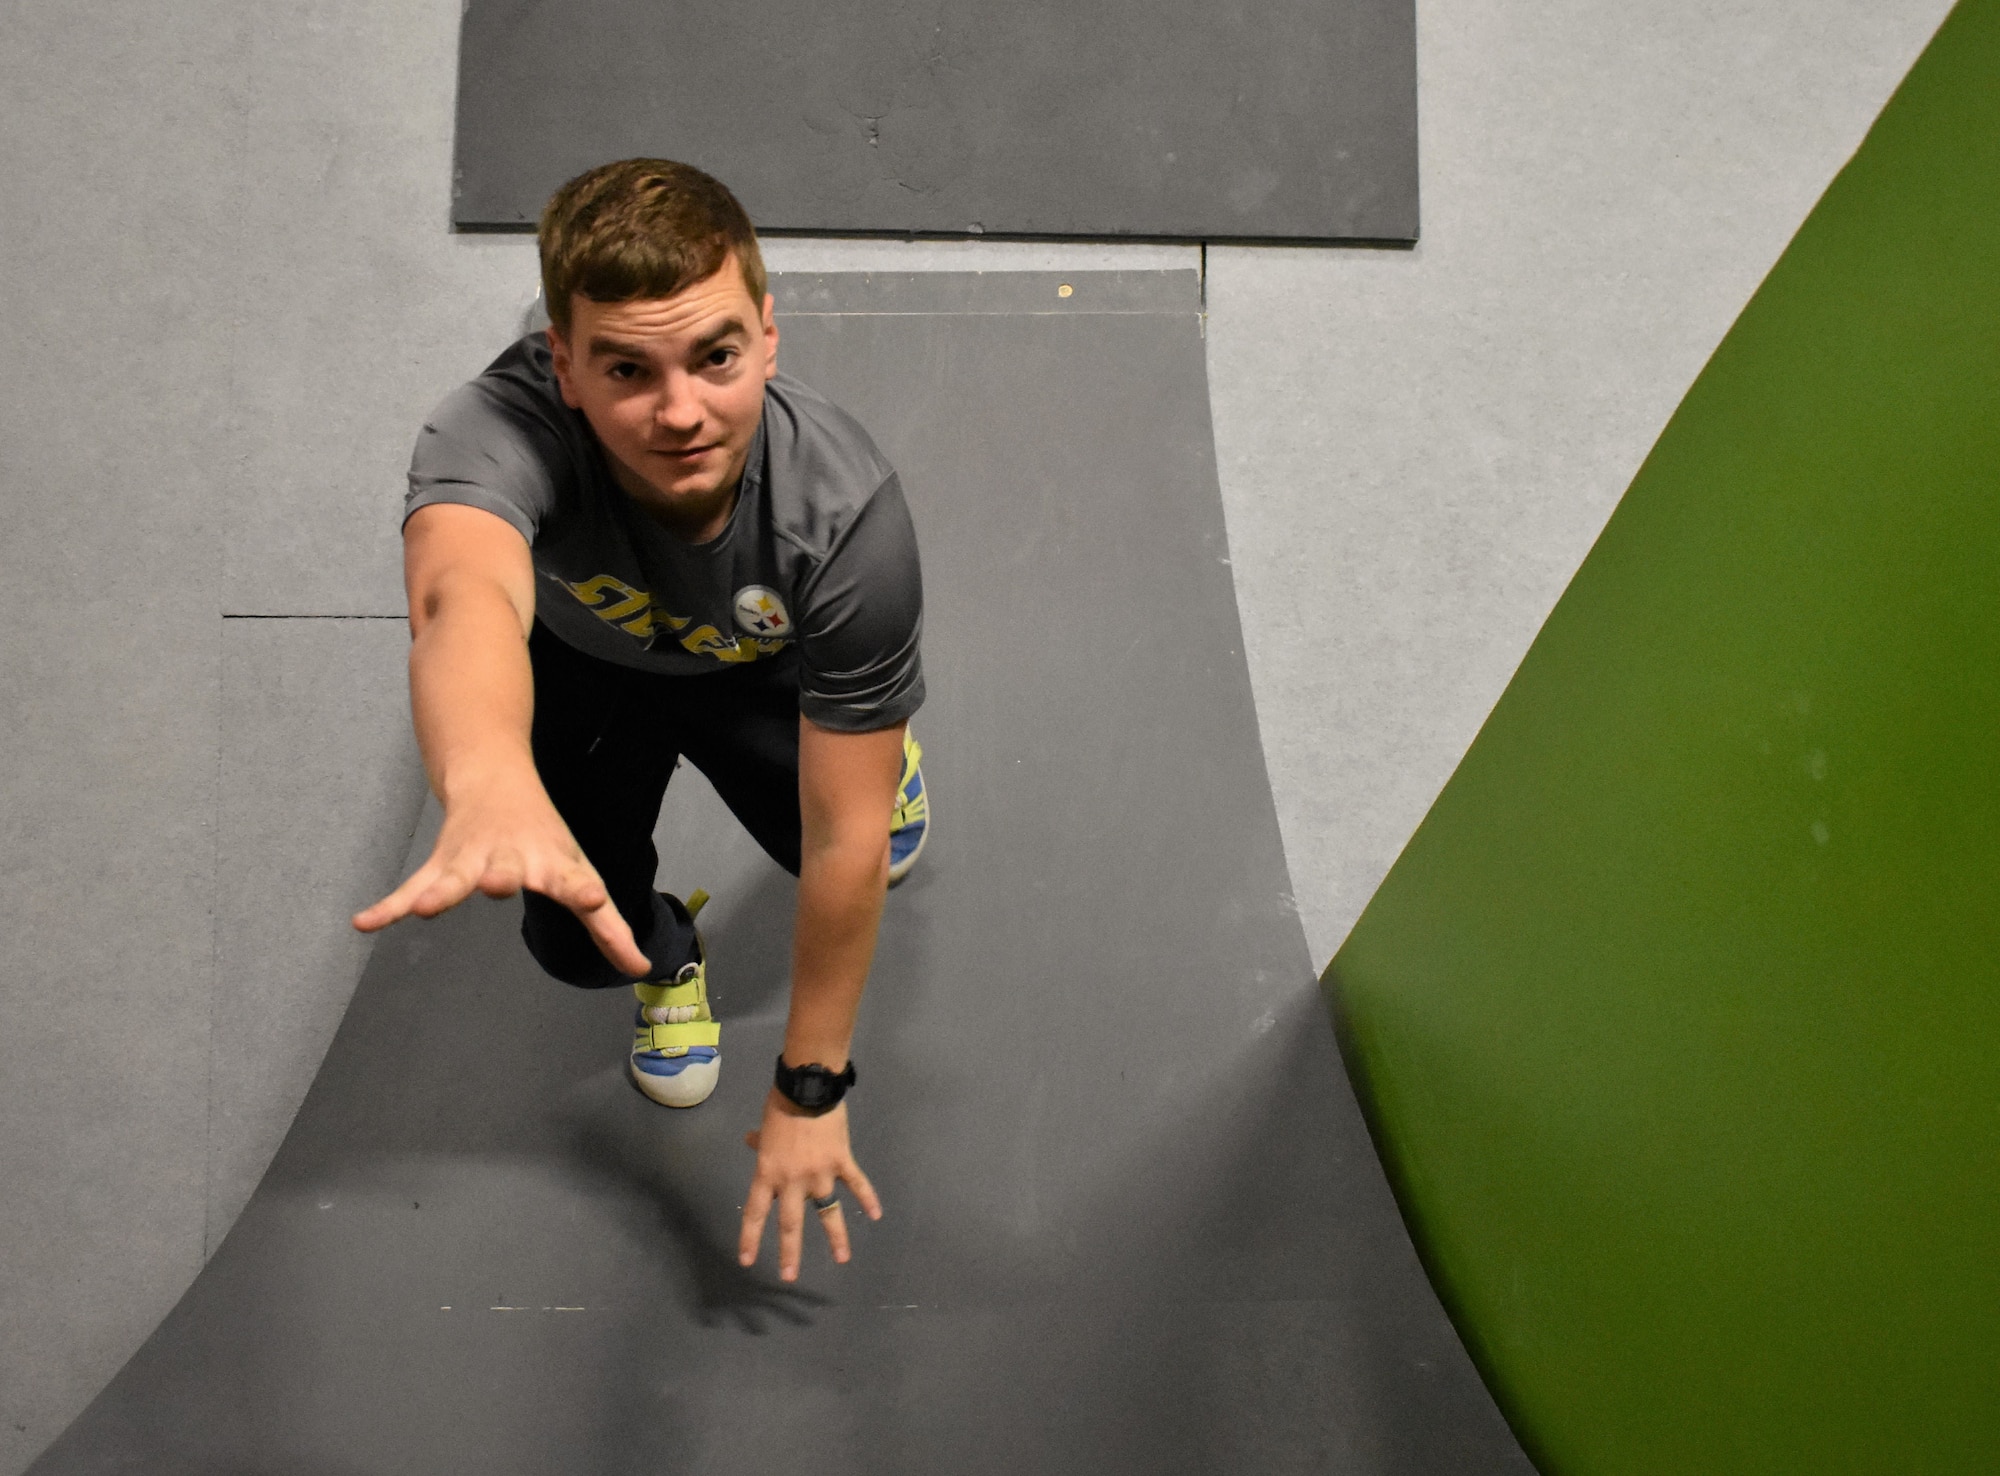 An Airman participates in a Ninja Warrior activity as part of resiliency building in the T.H.R.I.V.E Program.